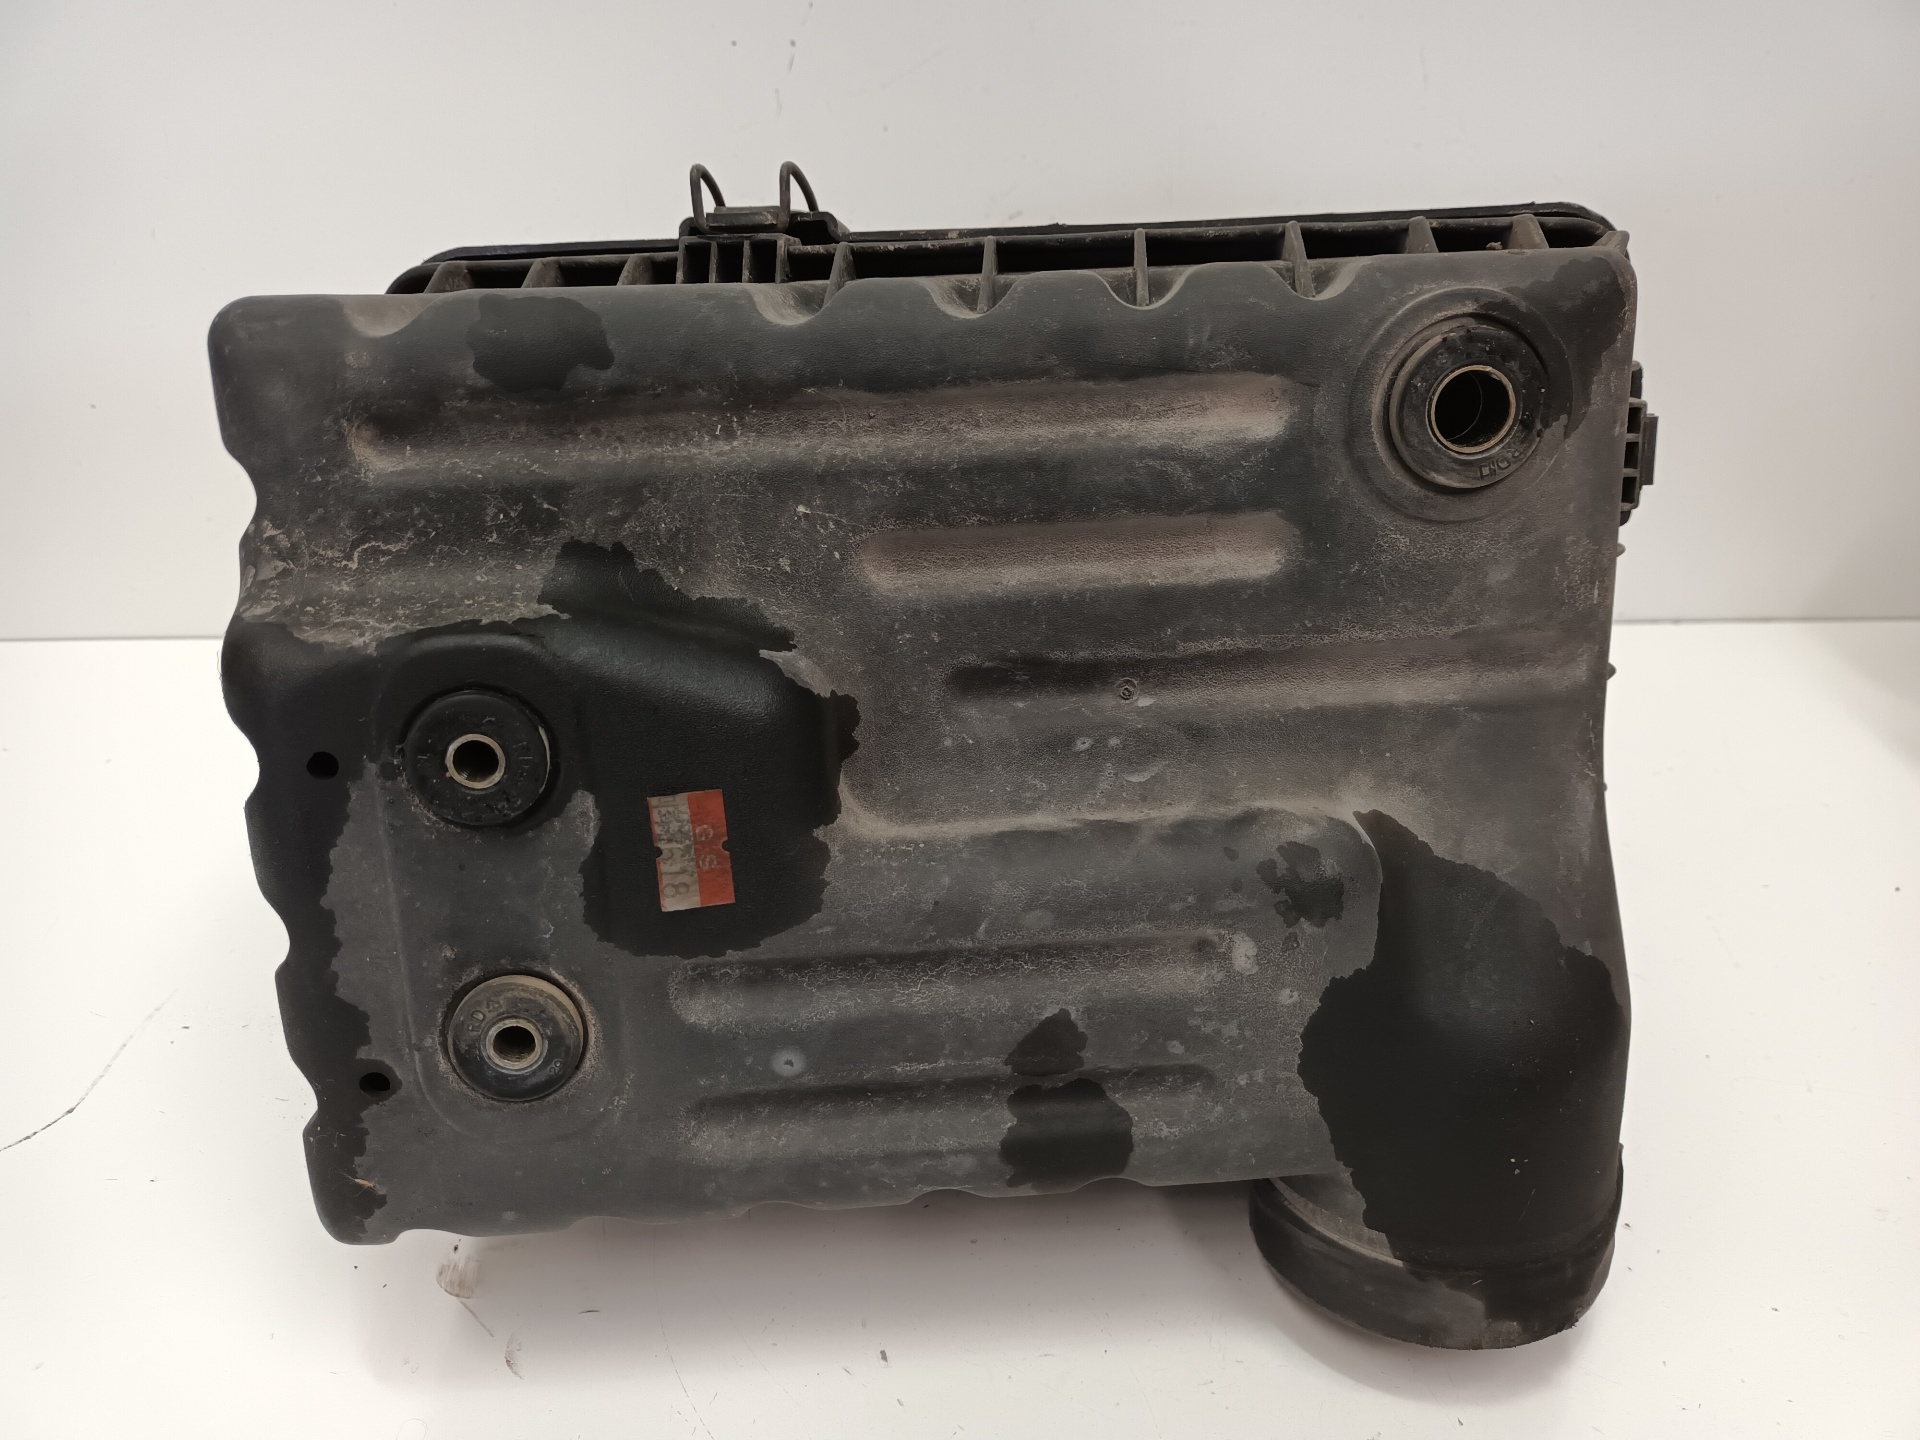 NISSAN Lantra J2 (1995-2000) Other Engine Compartment Parts 2811023003 25276005